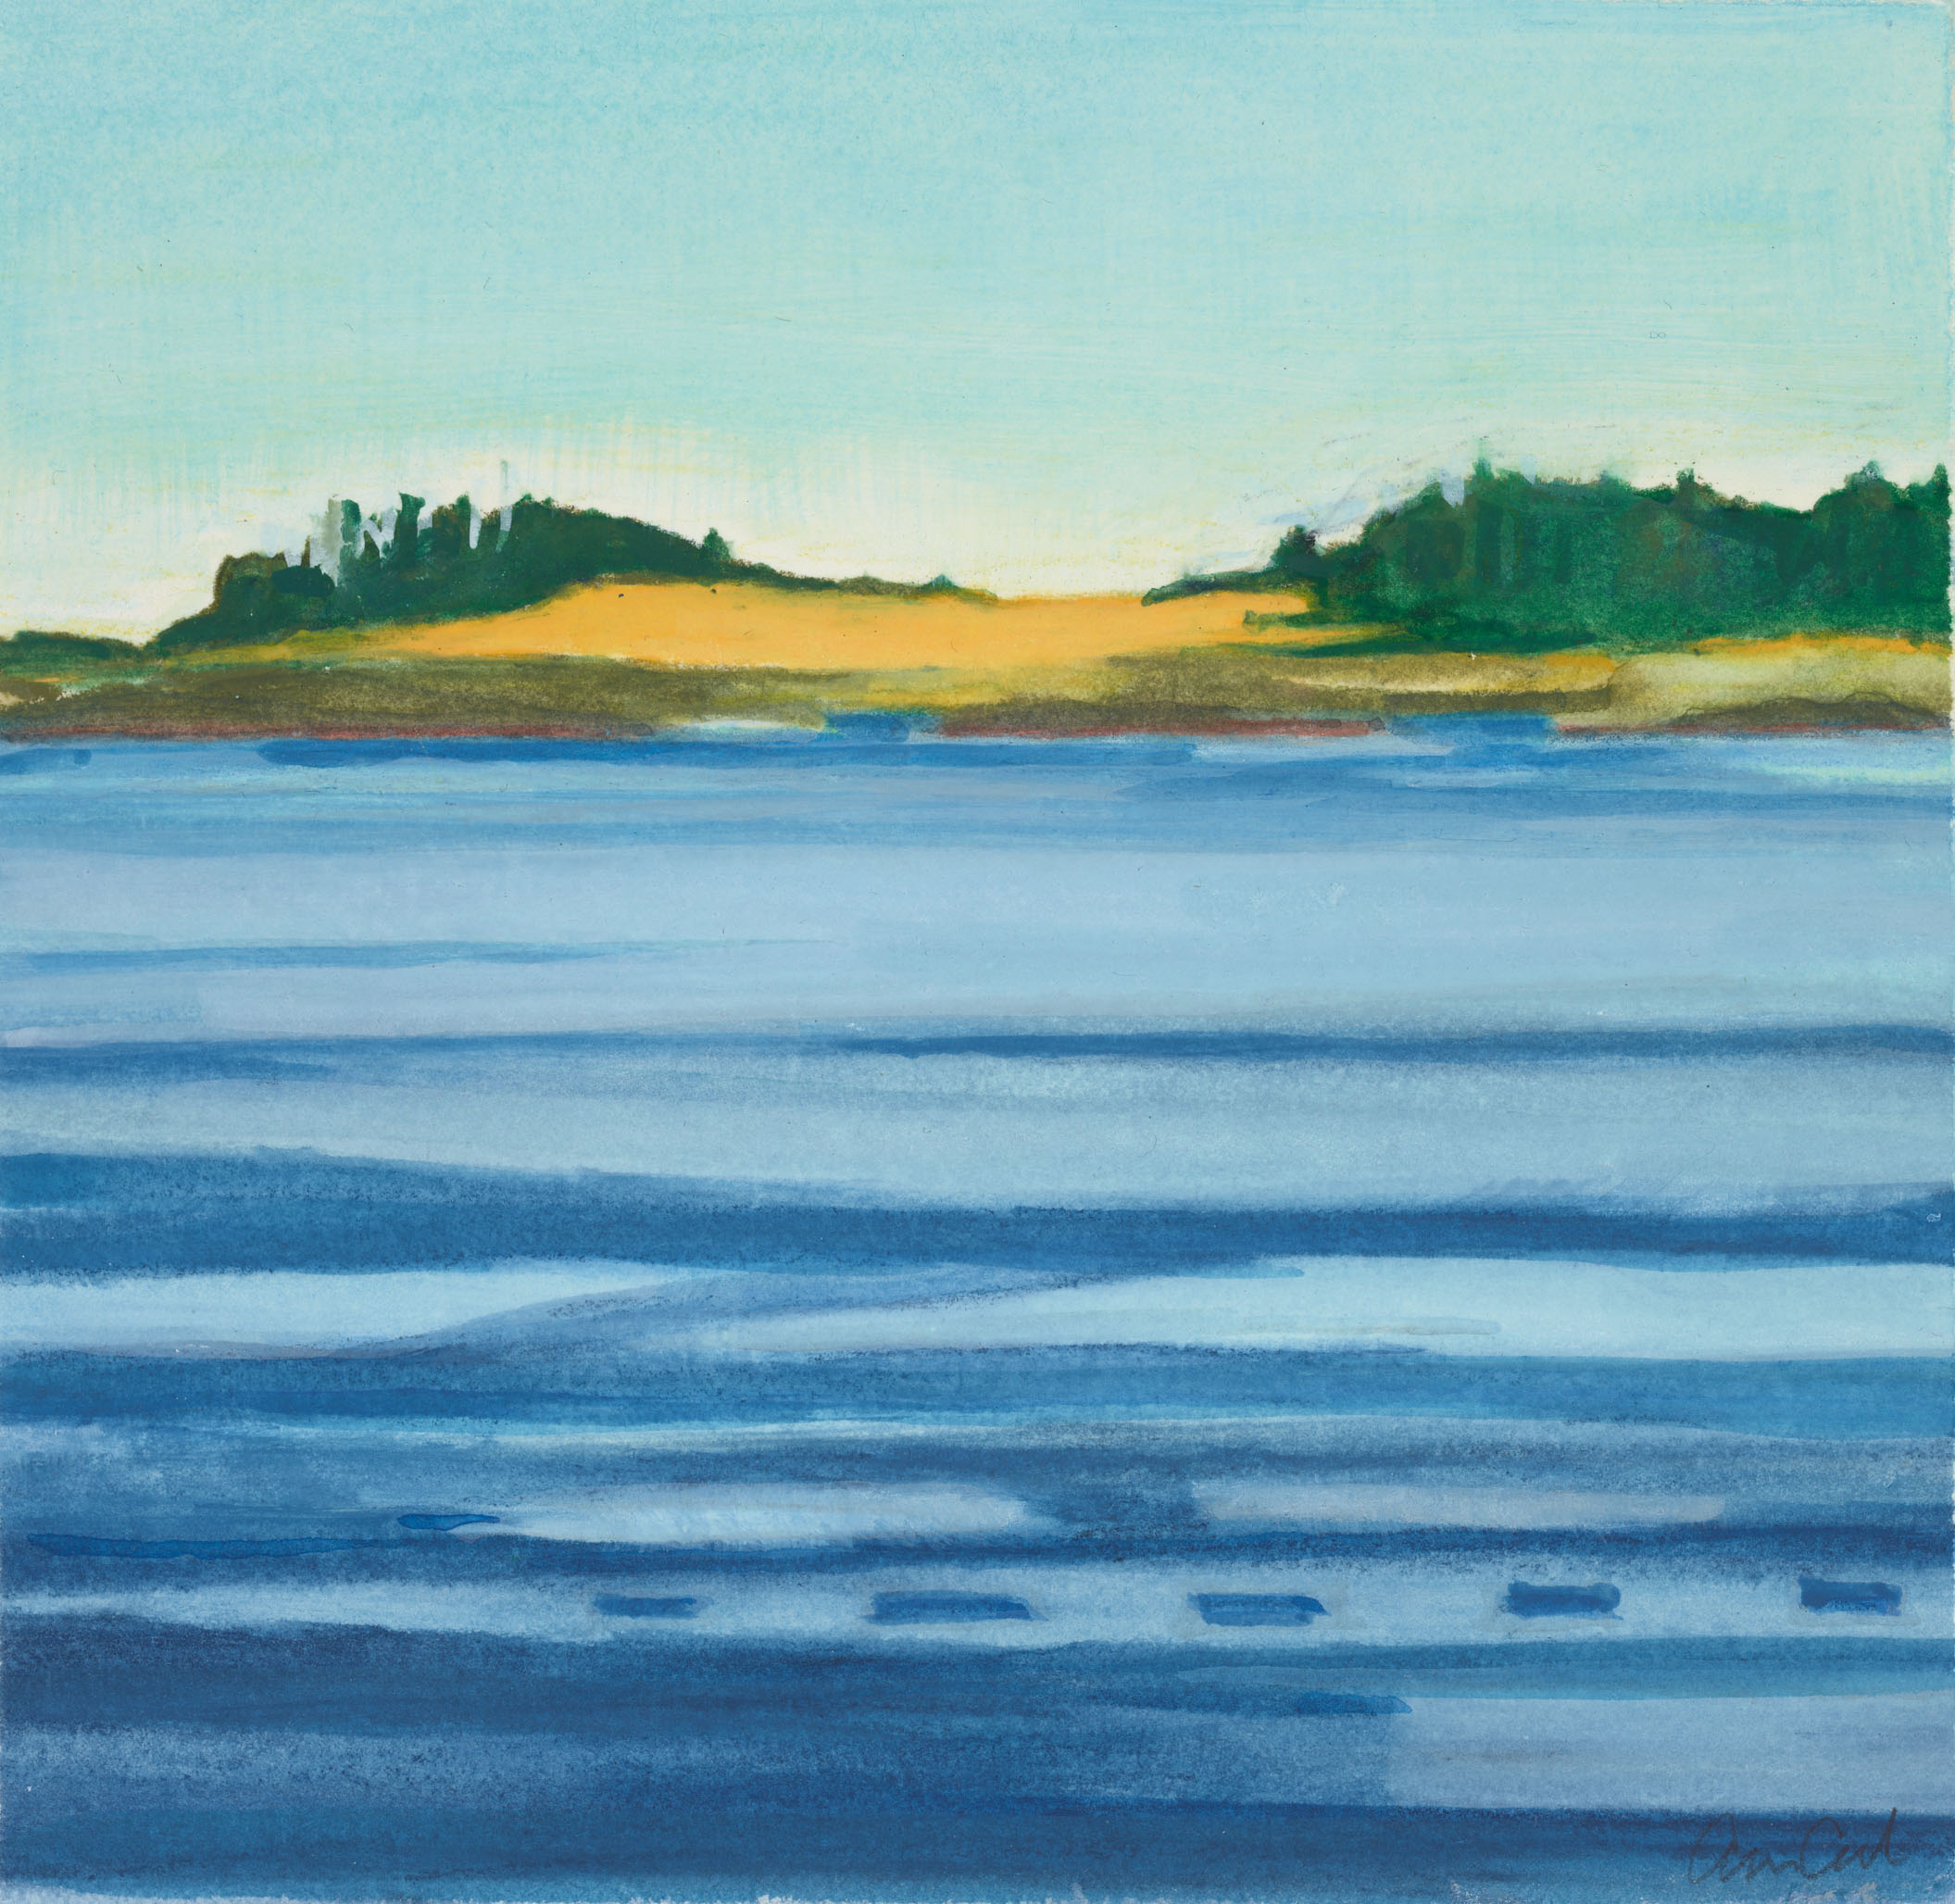 Richmond Island Fall, 2019, mixed media on paper, 8 x 8 inches